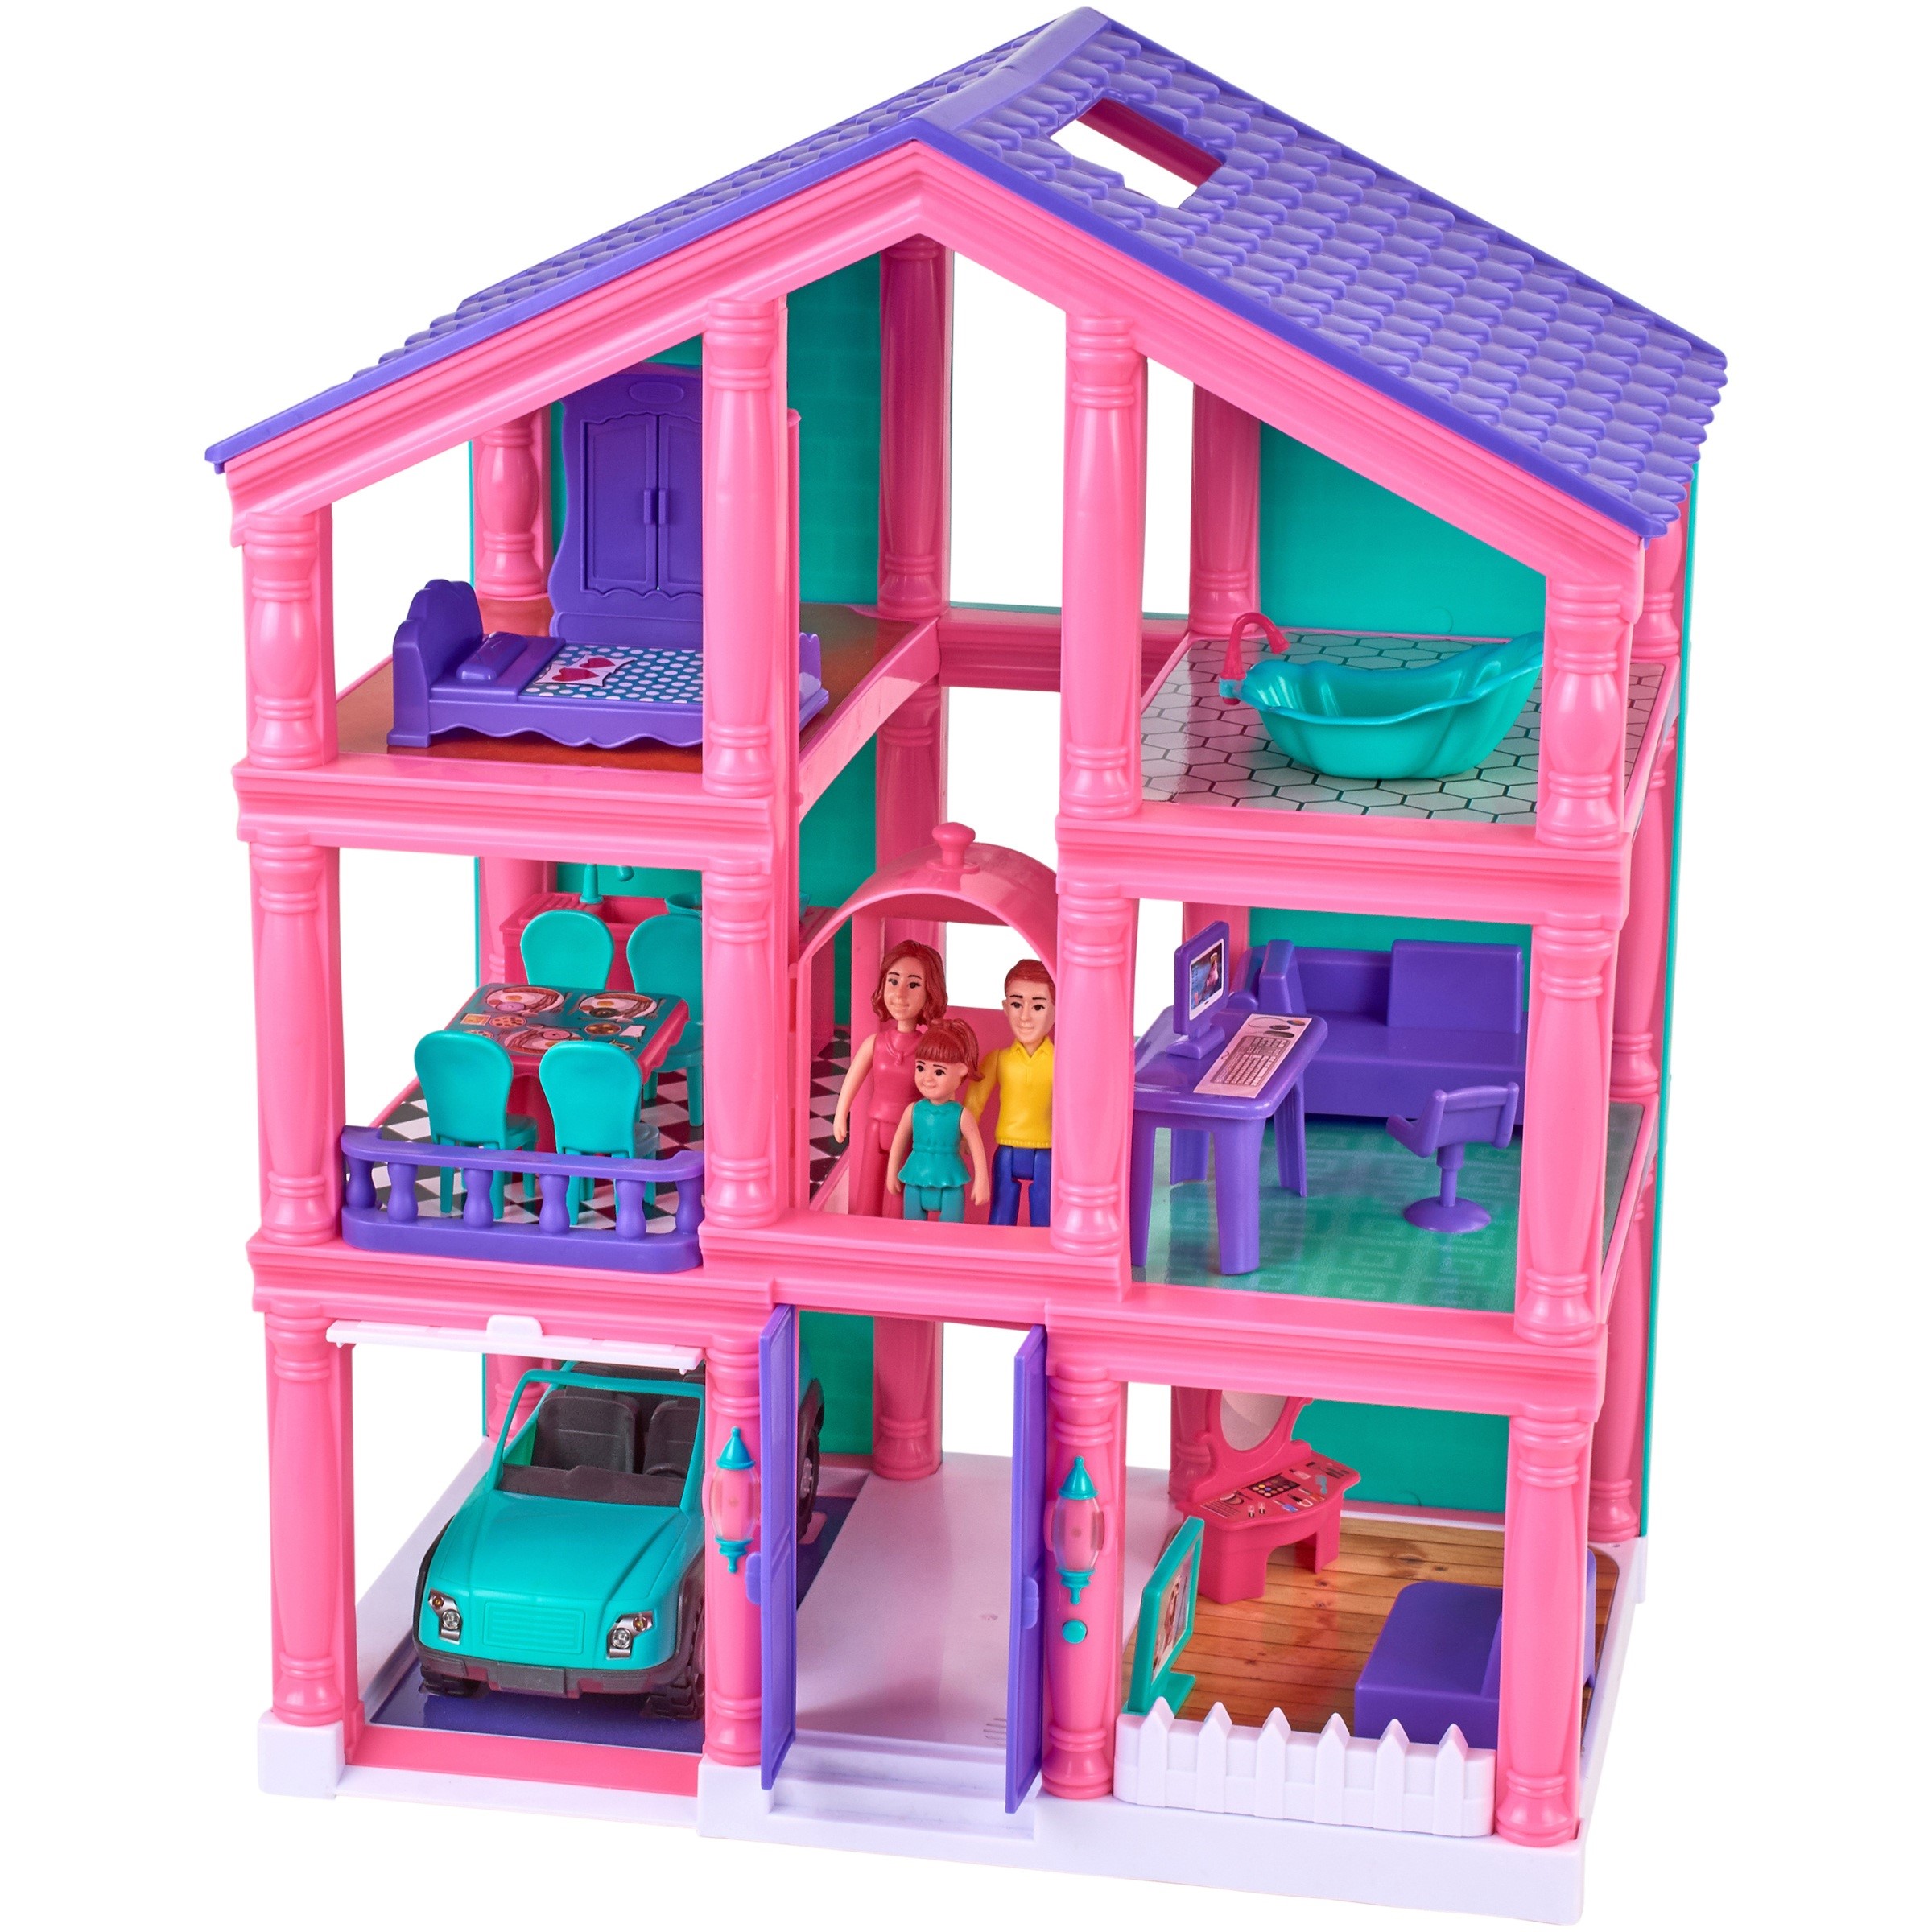 Kid Connection 3-Story Dollhouse Play Set with Working Garage and Elevator, 24 Pieces - image 1 of 6